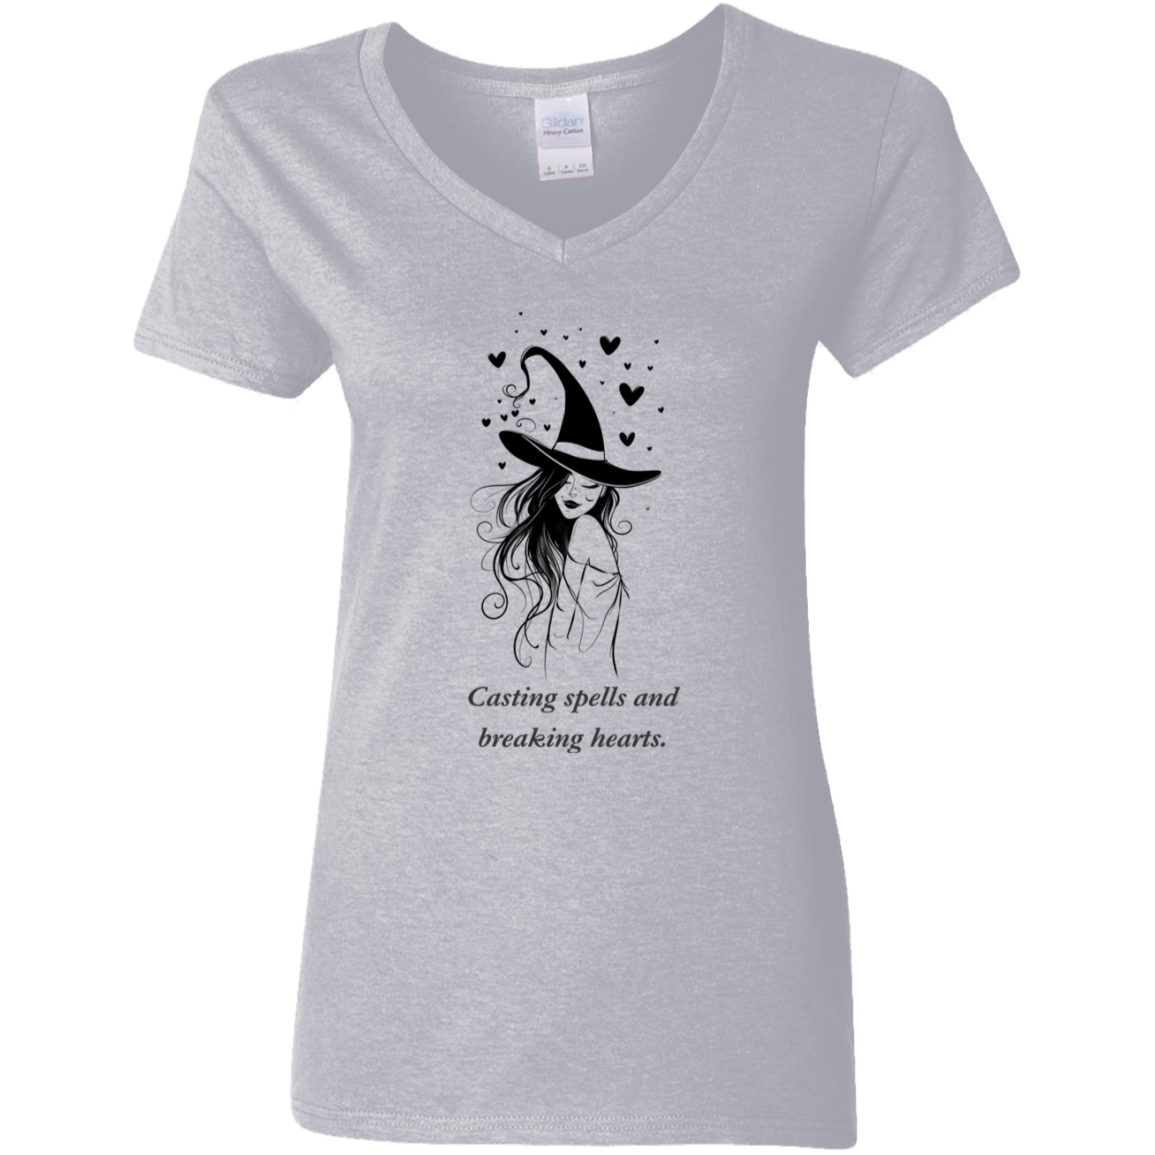 Casting spells and breaking hearts, women's gray graphic T shirt  from BLK Moon Shop